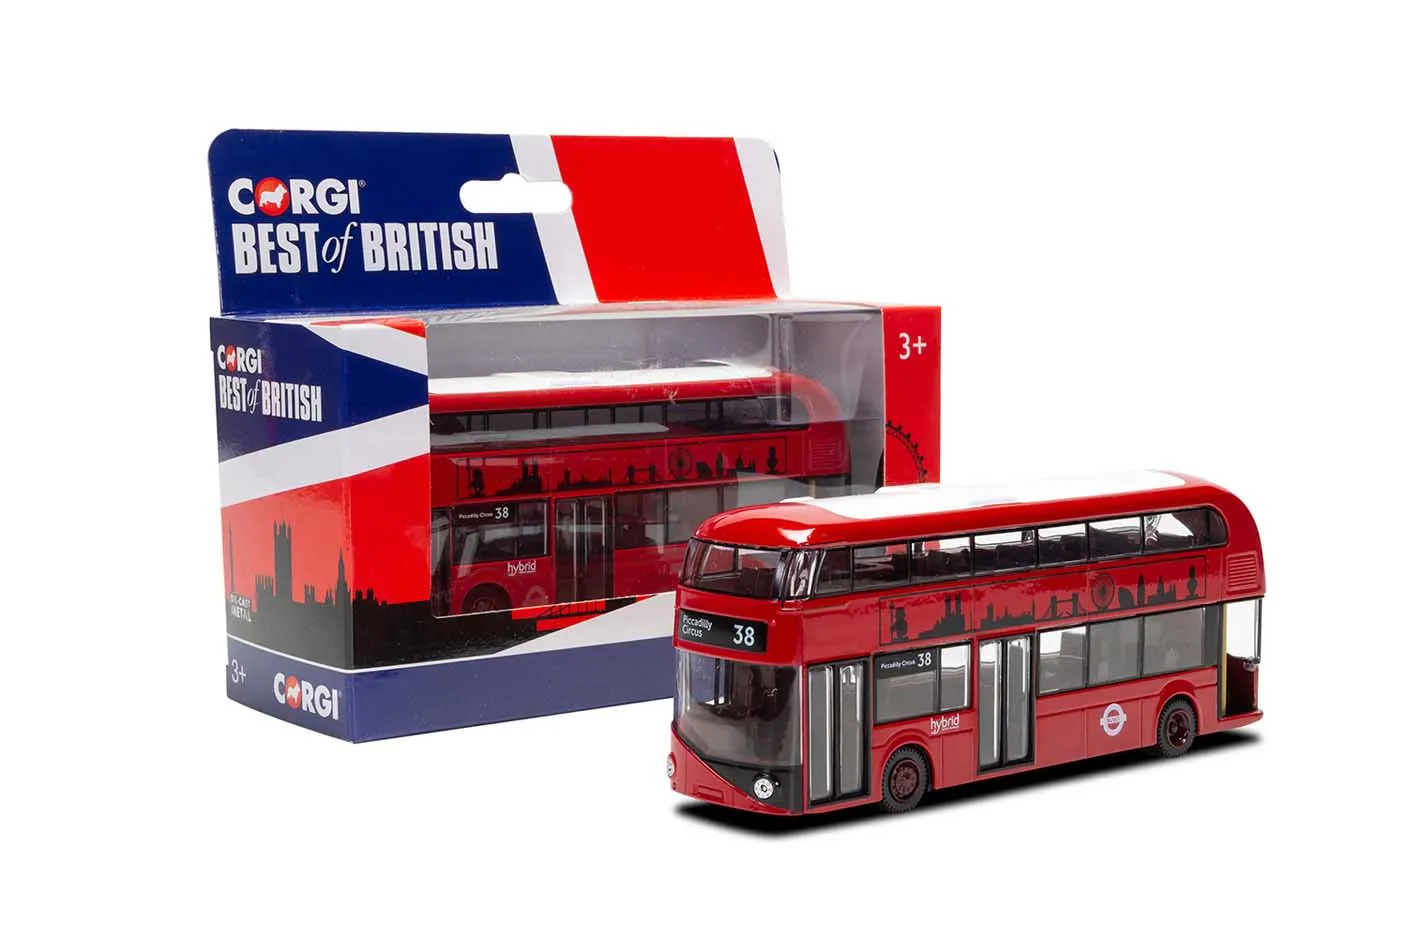 Best of British New Routemaster for London